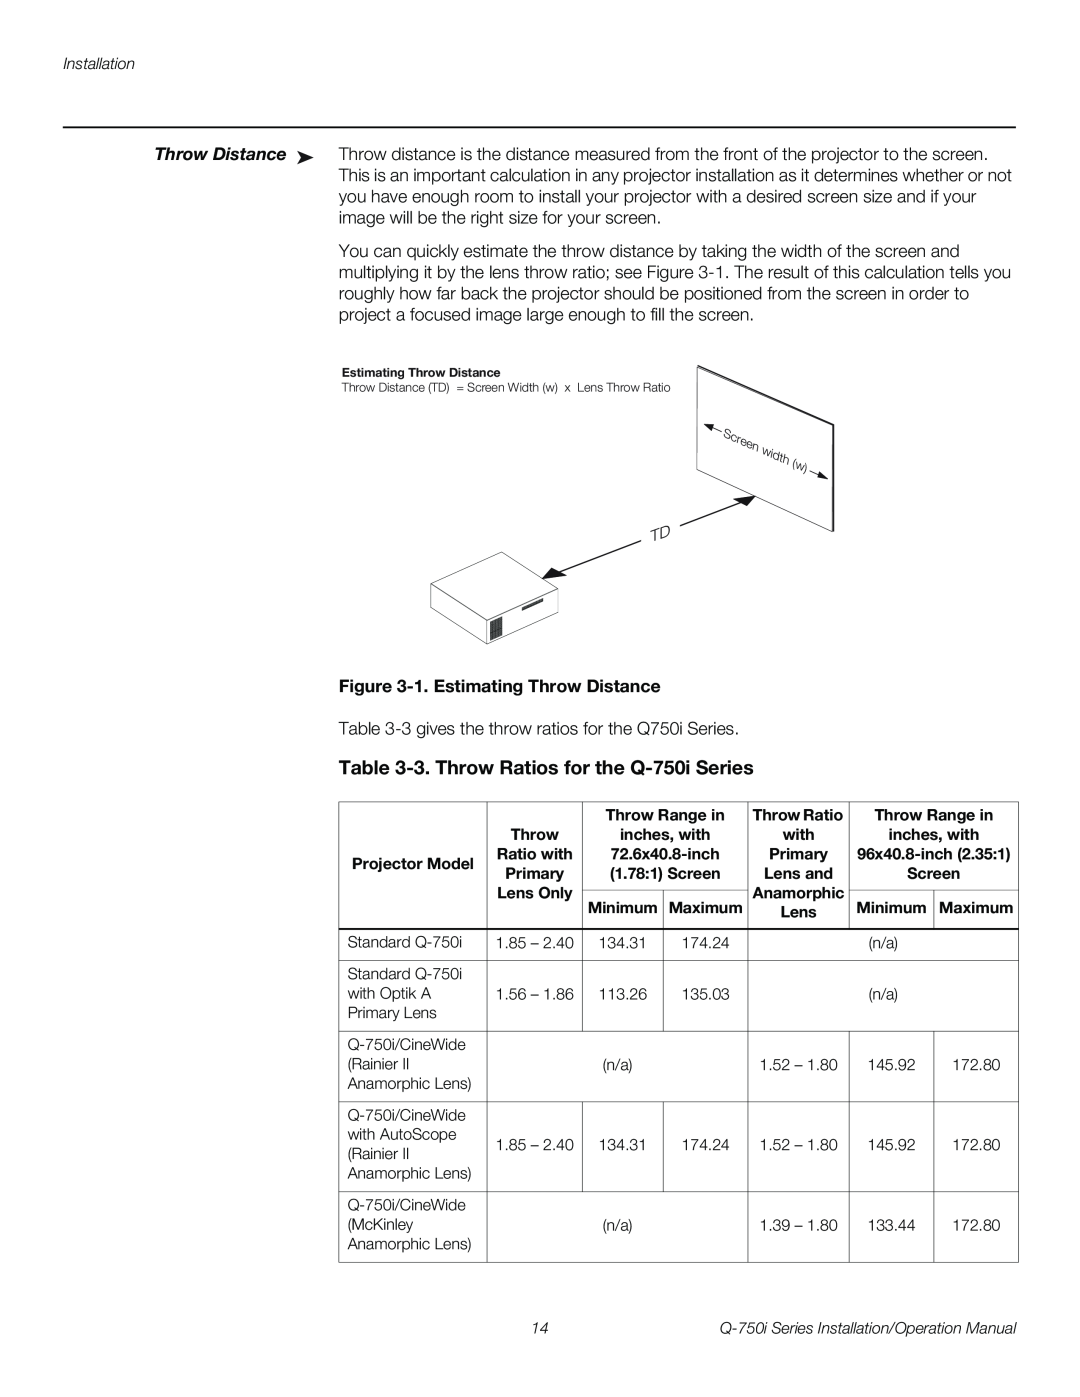 Runco Q-750I operation manual 3.Throw Ratios for the Q-750iSeries, 1.Estimating Throw Distance 